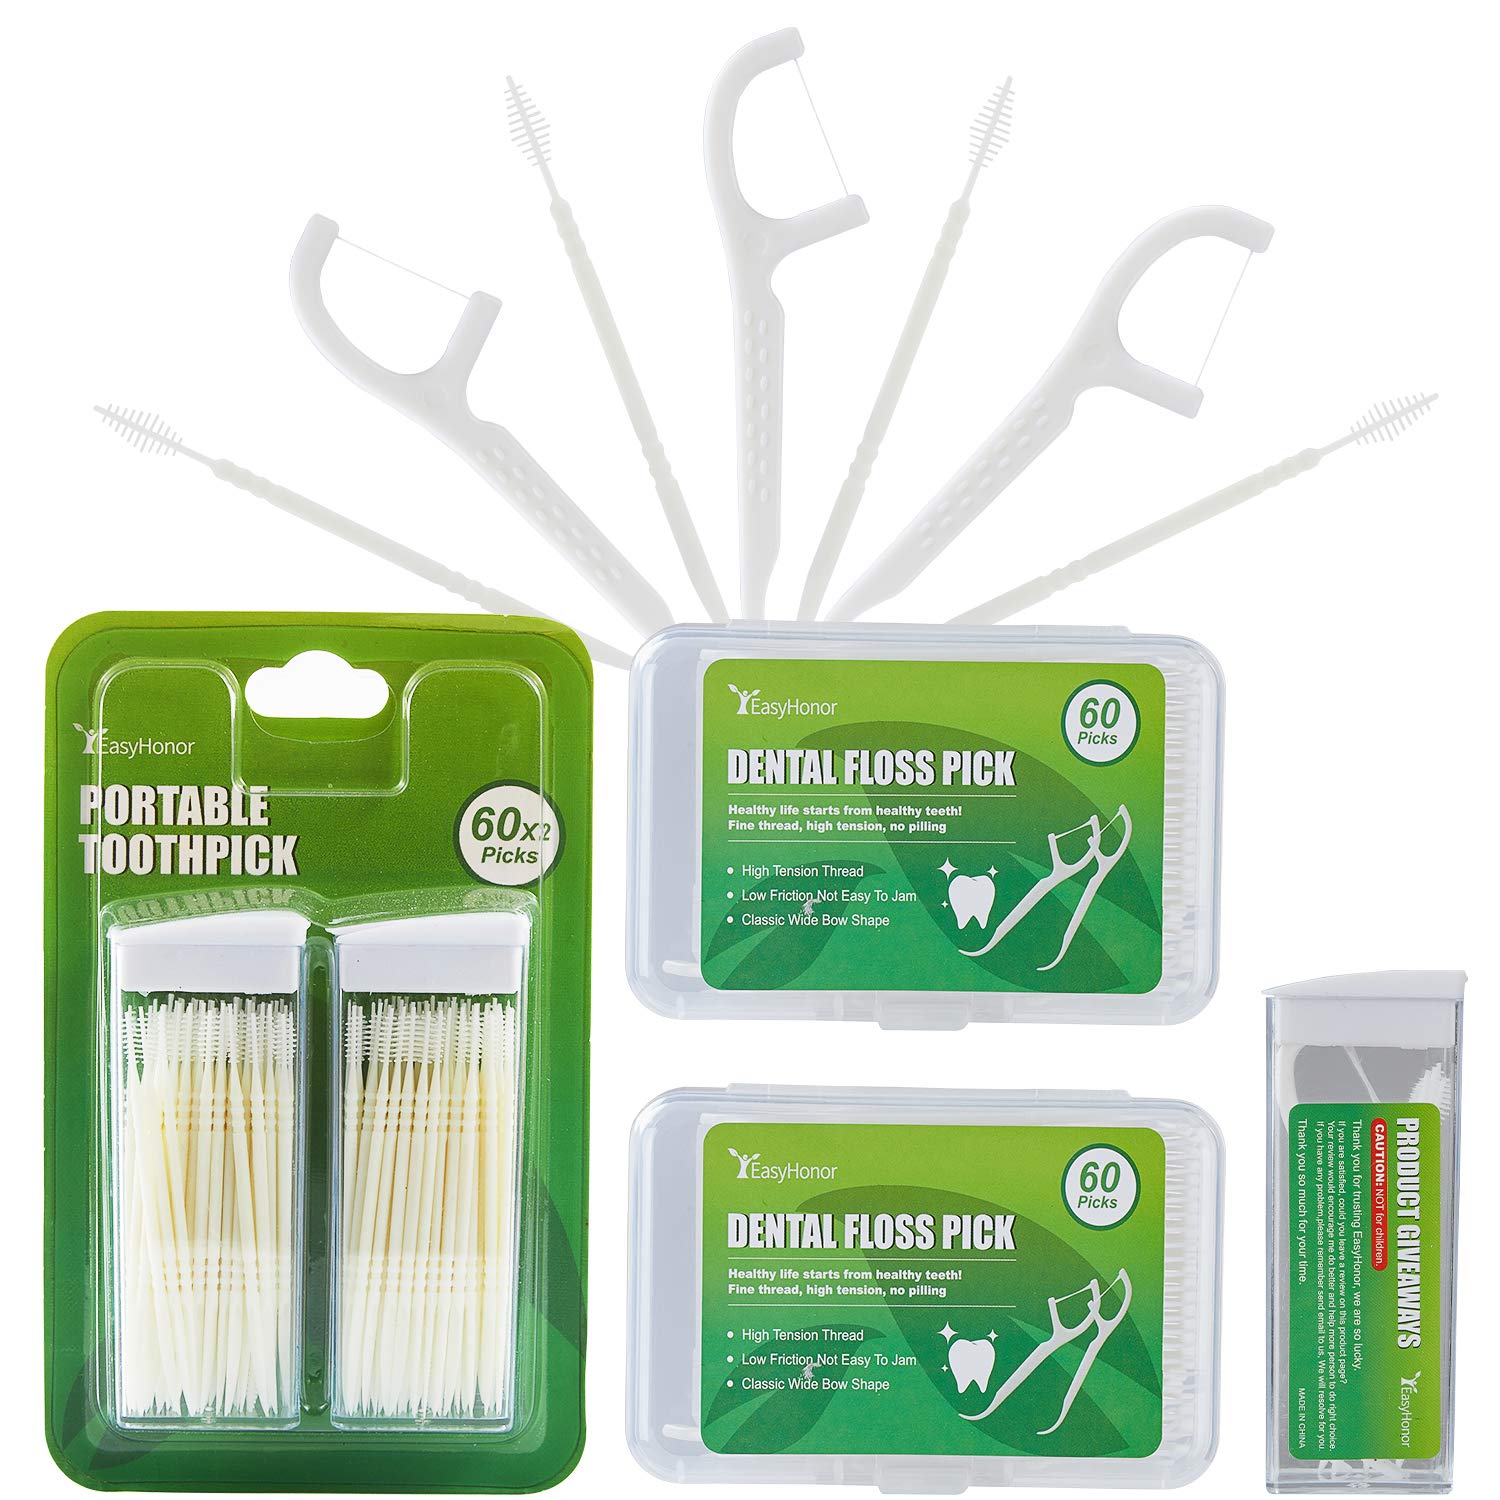 Dental Floss Picks 120 Counts, 2 Travel Floss Cases, And Toothpicks 120 Counts,2 Boxes .Gift 1 Mini Toothpick Box.